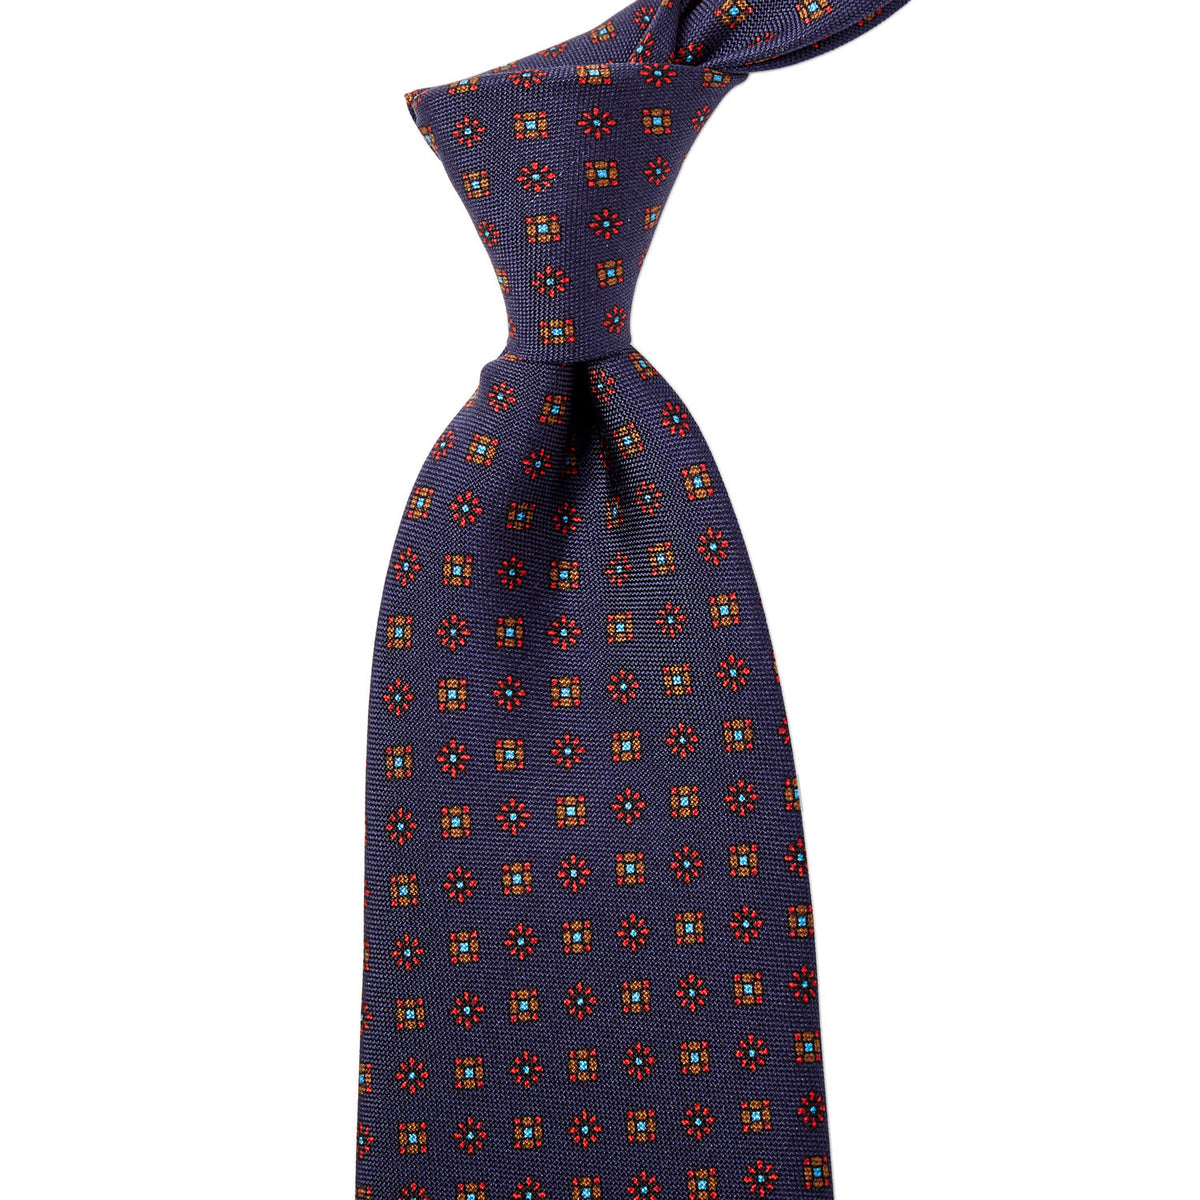 Handmade in the United Kingdom, this Sovereign Grade Navy Floral 25oz Silk Hopsack Tie (150x8.5 cm) from KirbyAllison.com features a red, orange, and blue pattern showcasing quality craftsmanship.